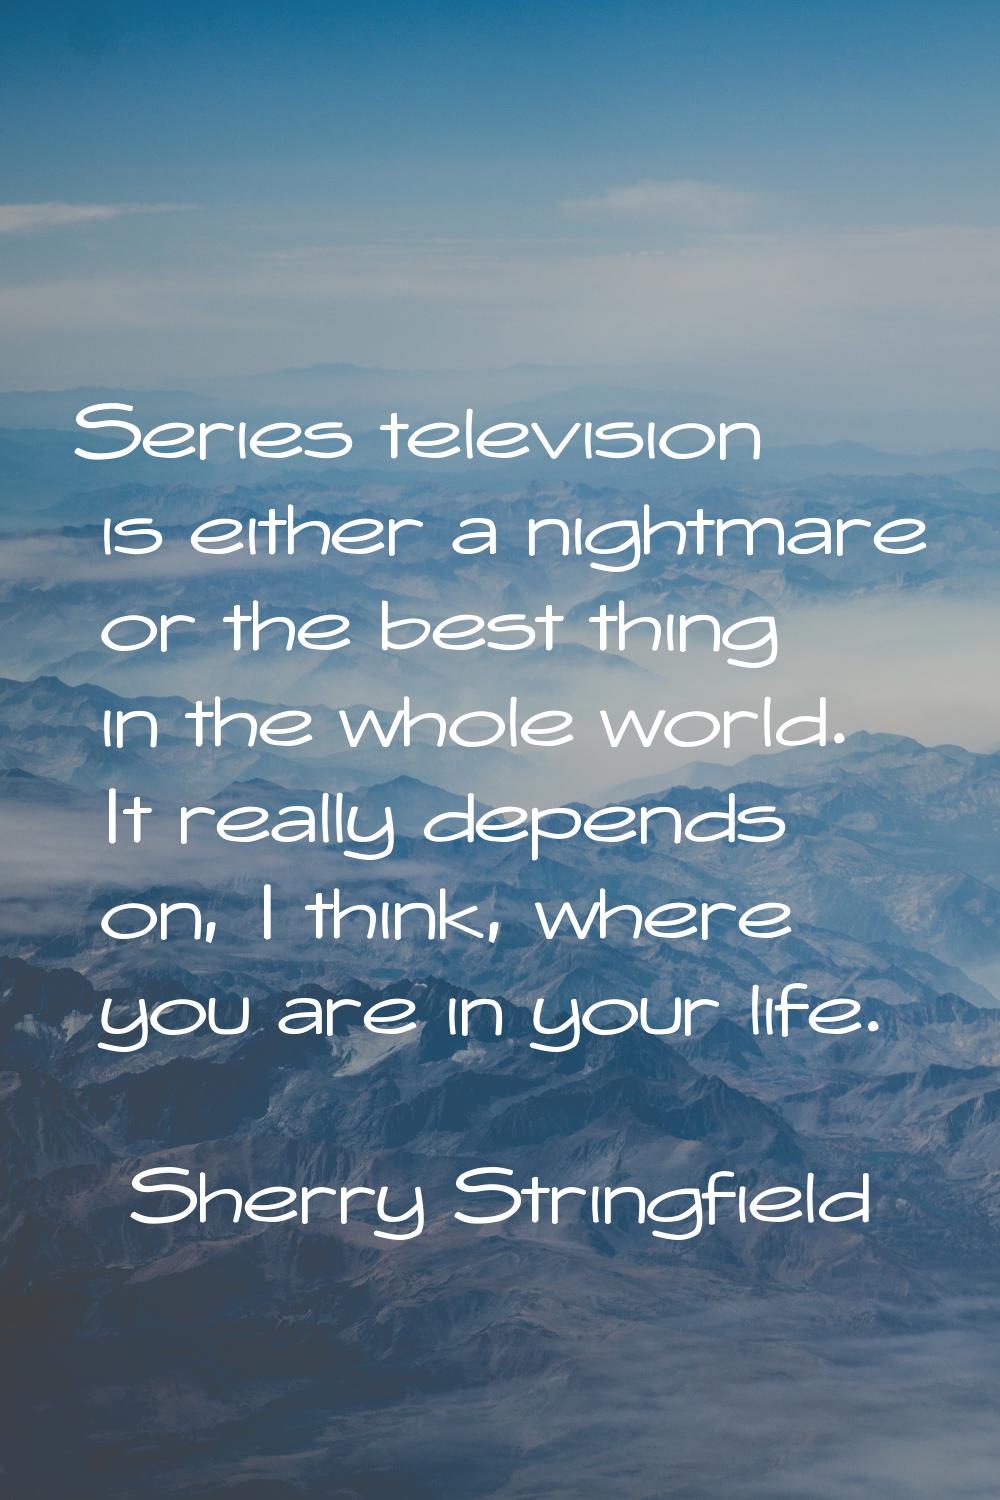 Series television is either a nightmare or the best thing in the whole world. It really depends on,